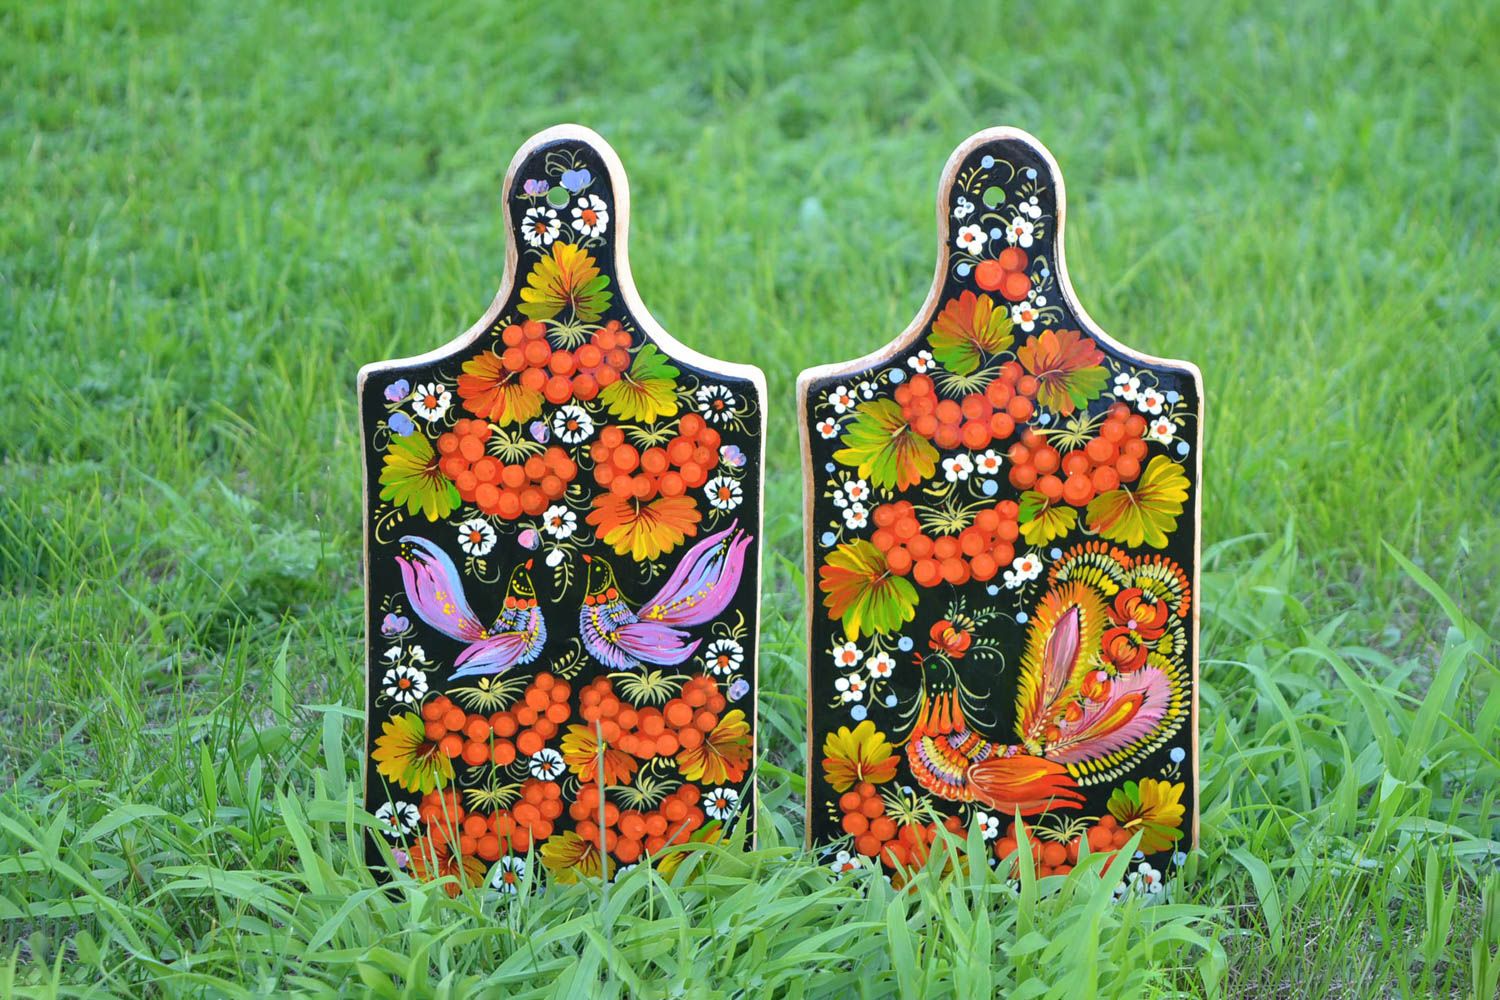 Handmade chopping boards painted cutting boards for kitchen home decor ideas photo 1